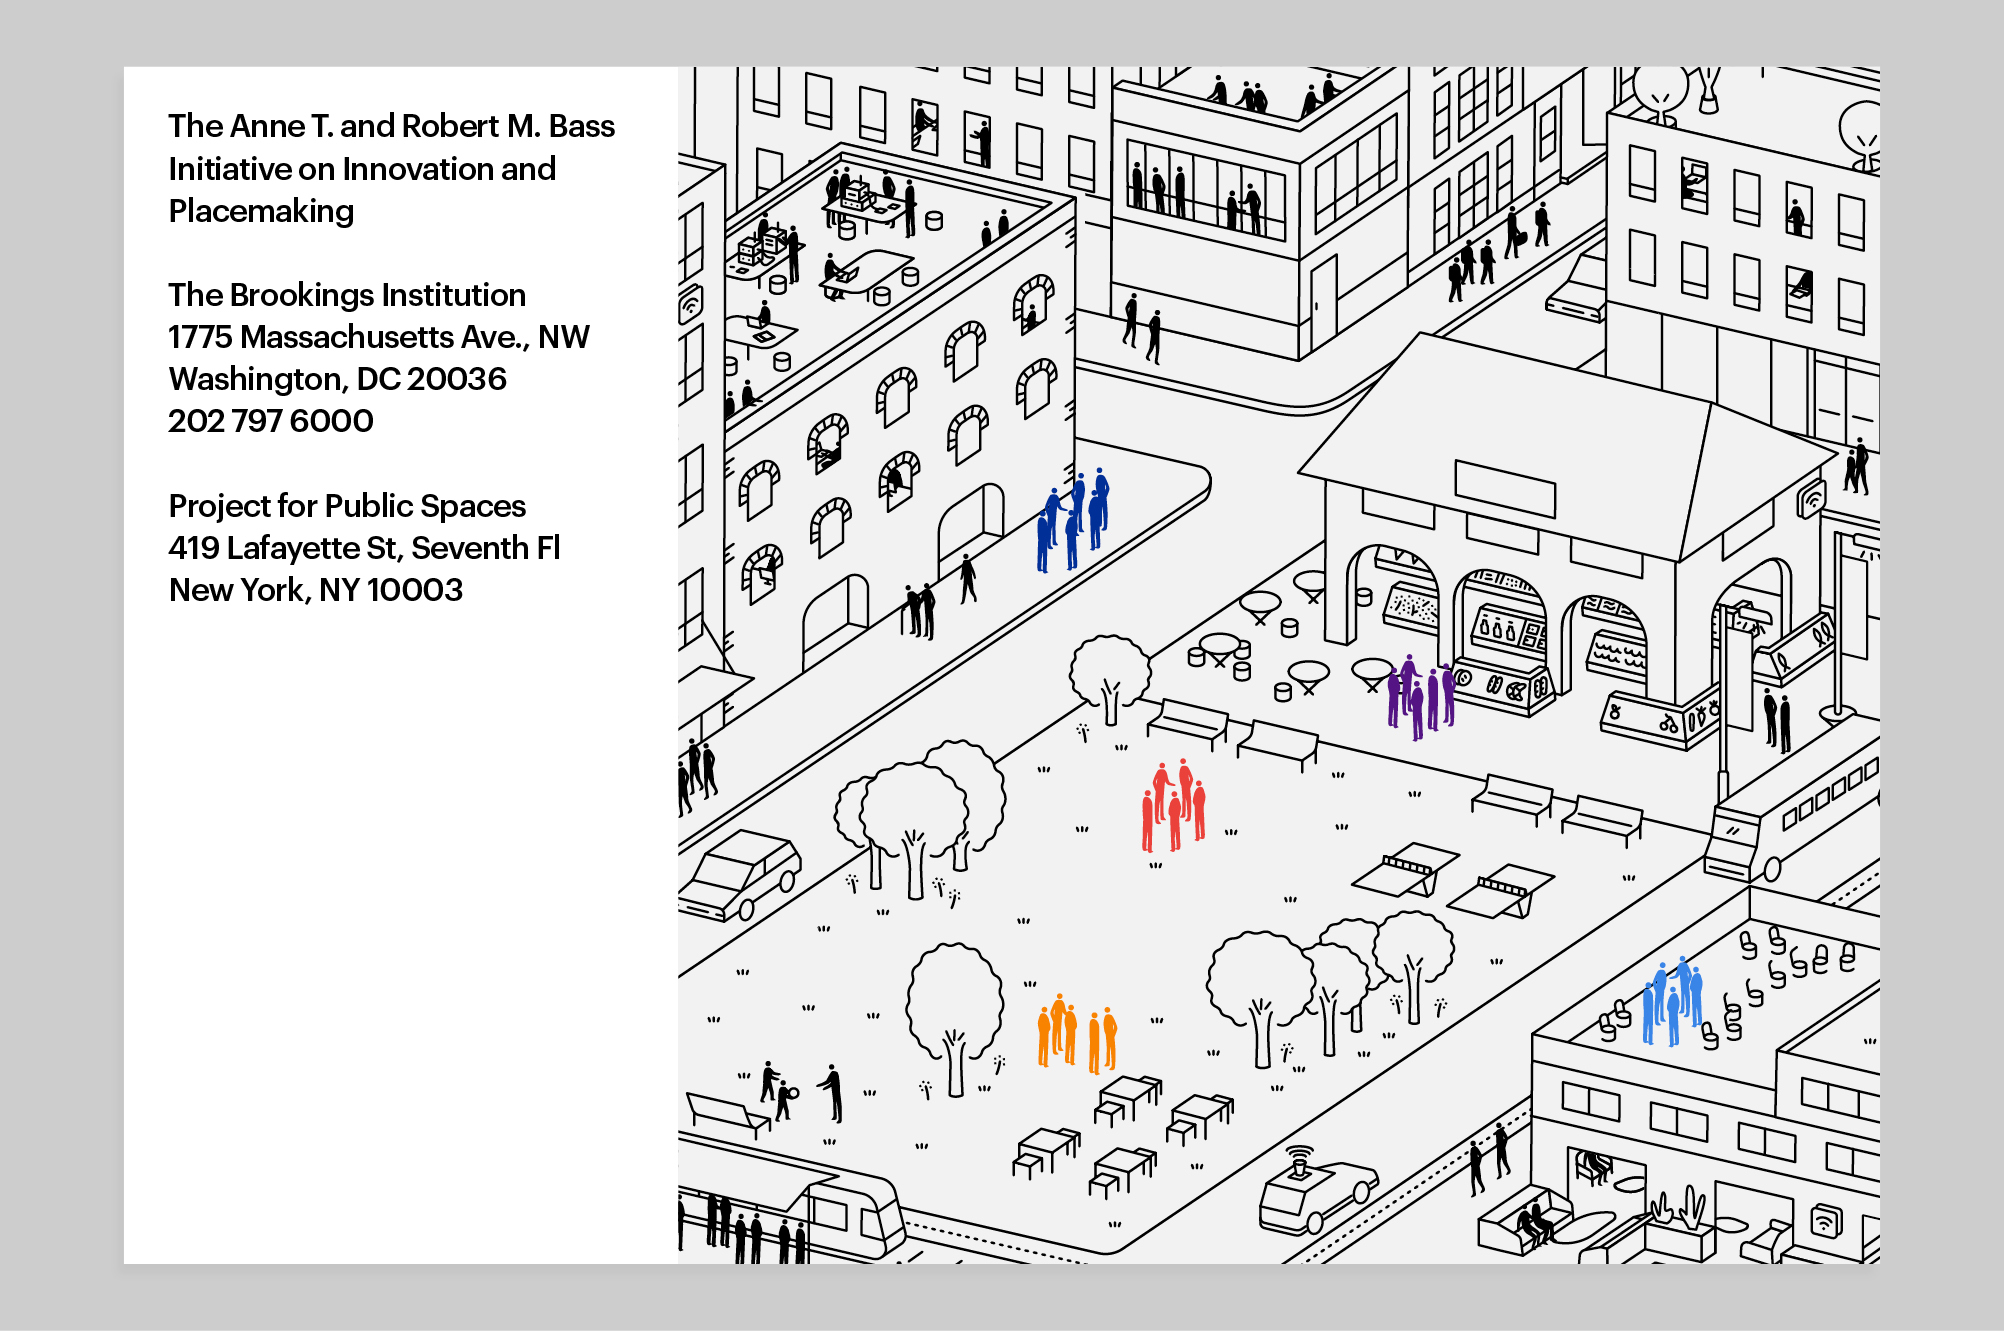 Brookings Institution and Project for Public Spaces Handbook - MTWTF